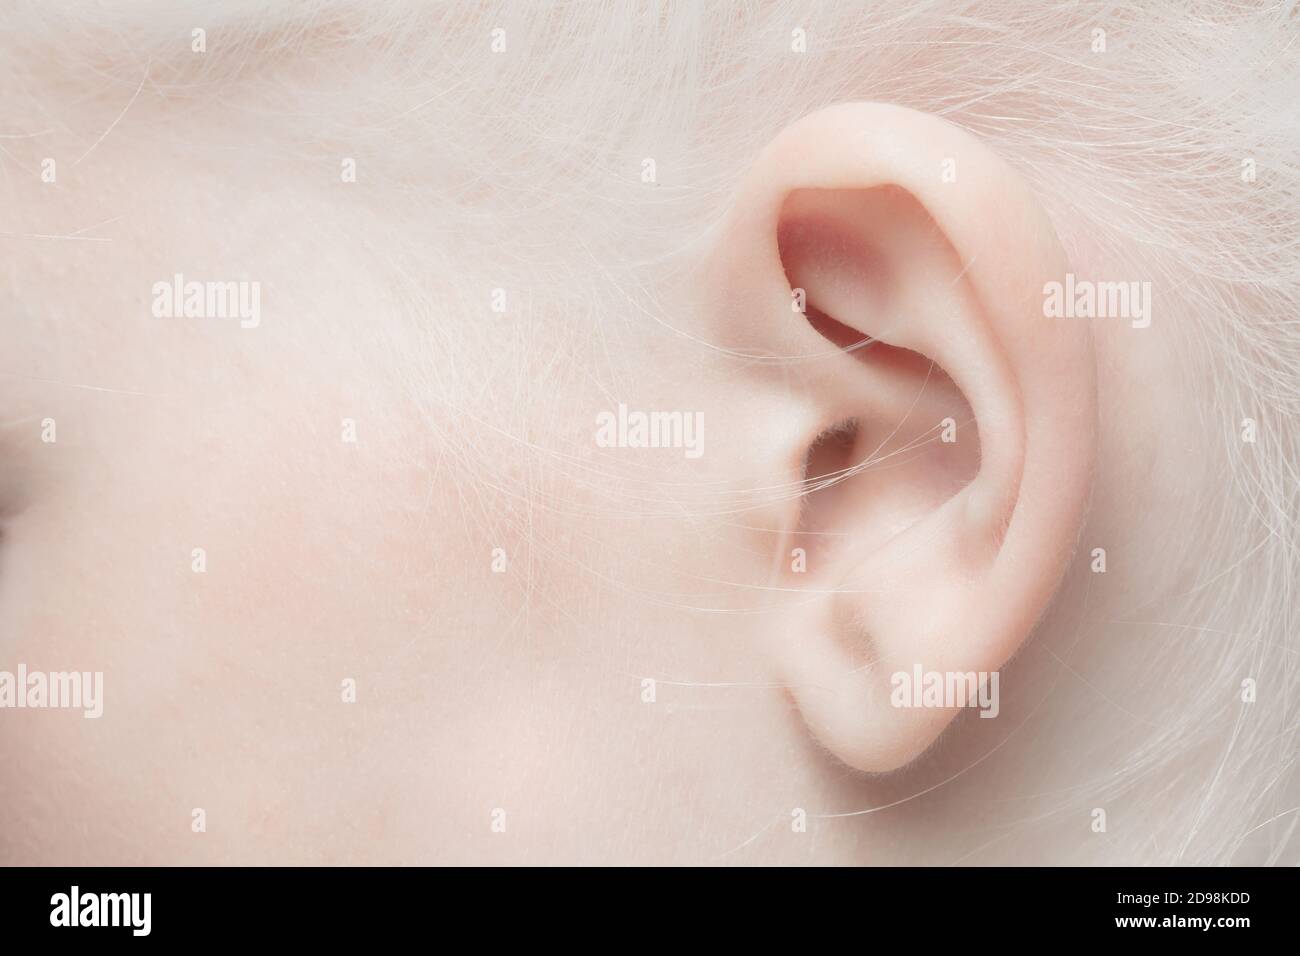 Ear Close Up Portrait Of Beautiful Albino Female Model Parts Of Face And Body Beauty Fashion Skincare Cosmetics Wellness Concept Copyspace Well Kept Skin Fresh Look Details Stock Photo Alamy